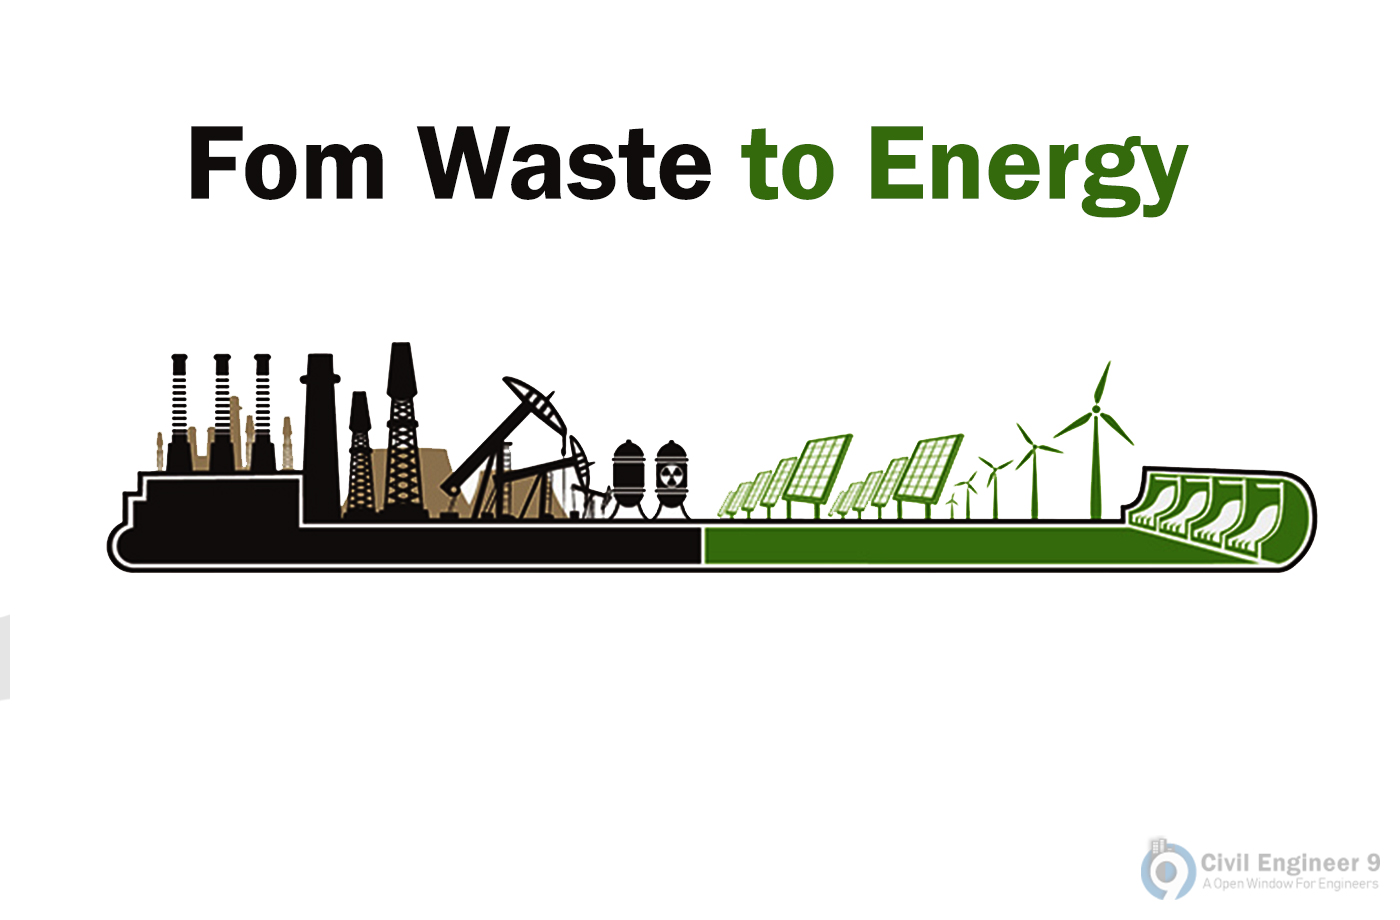 Waste to energy process